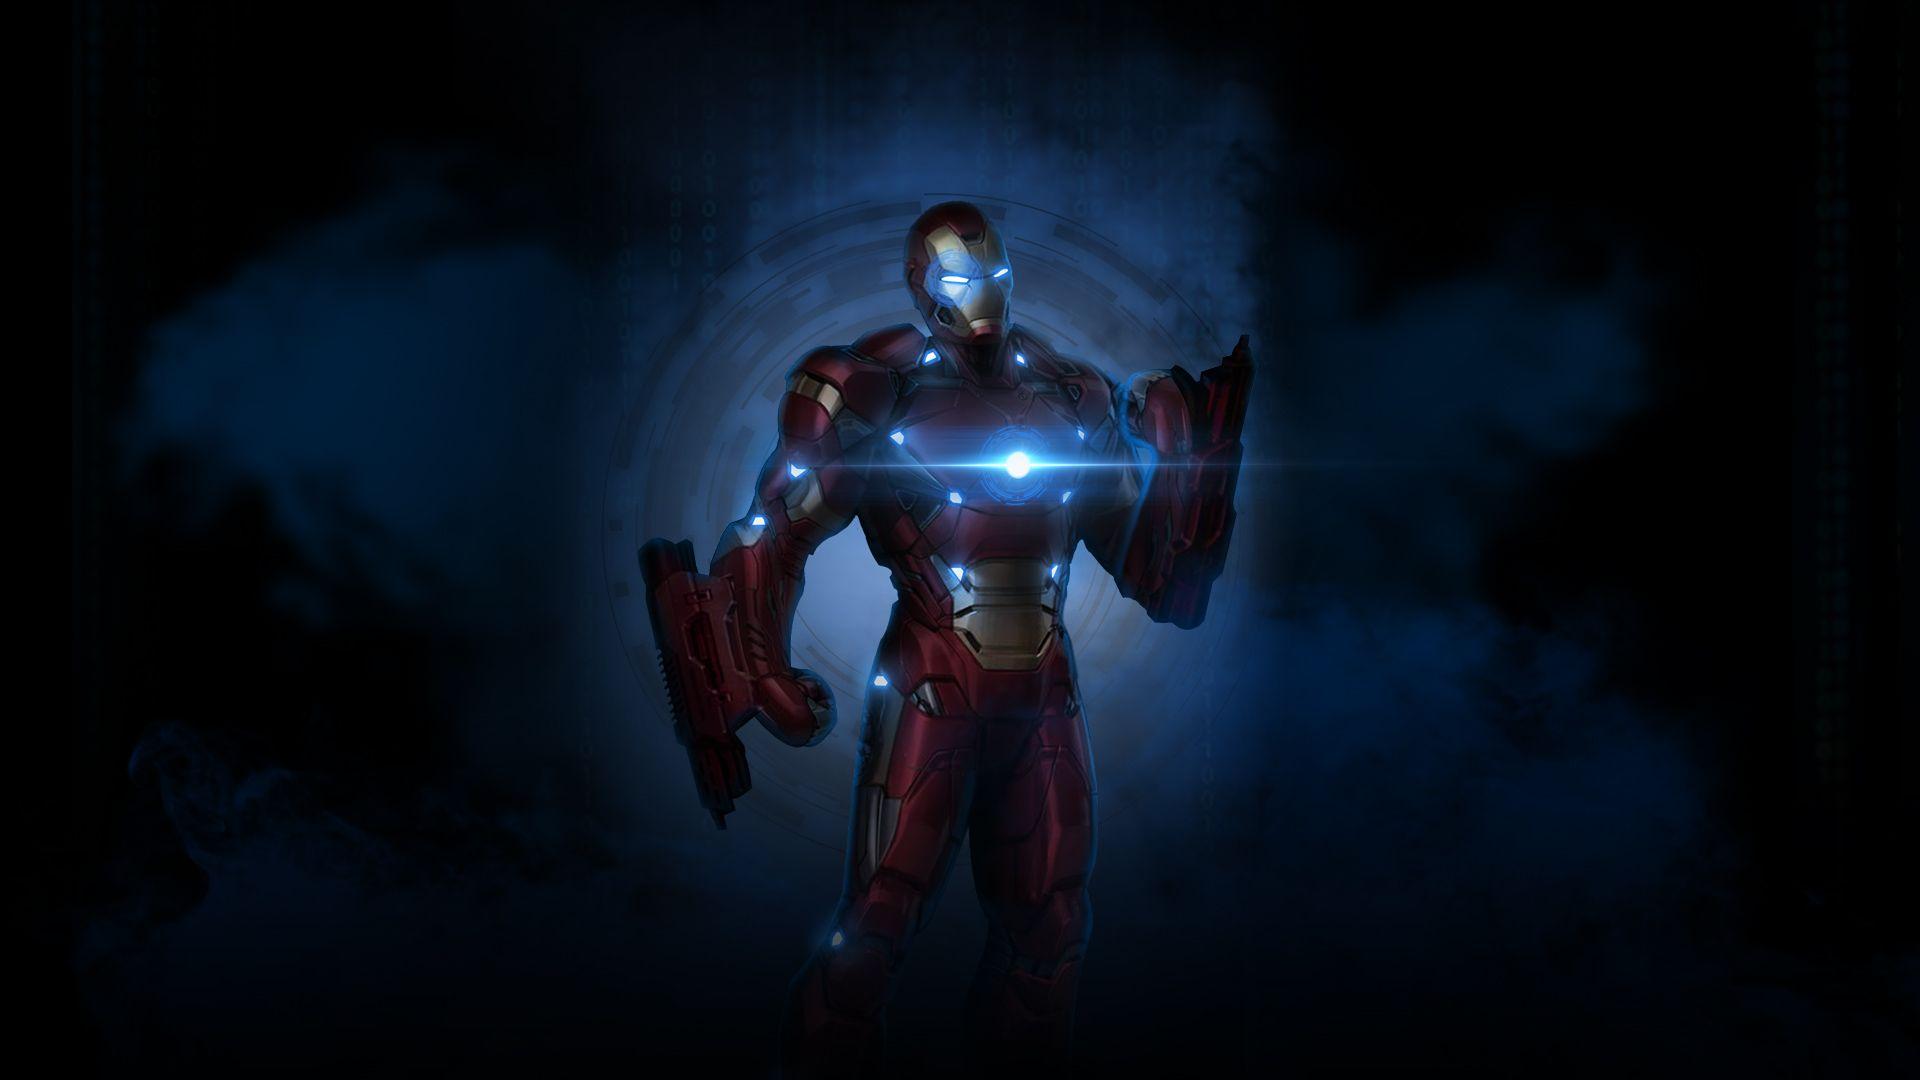 download iron man 3 for blackberry